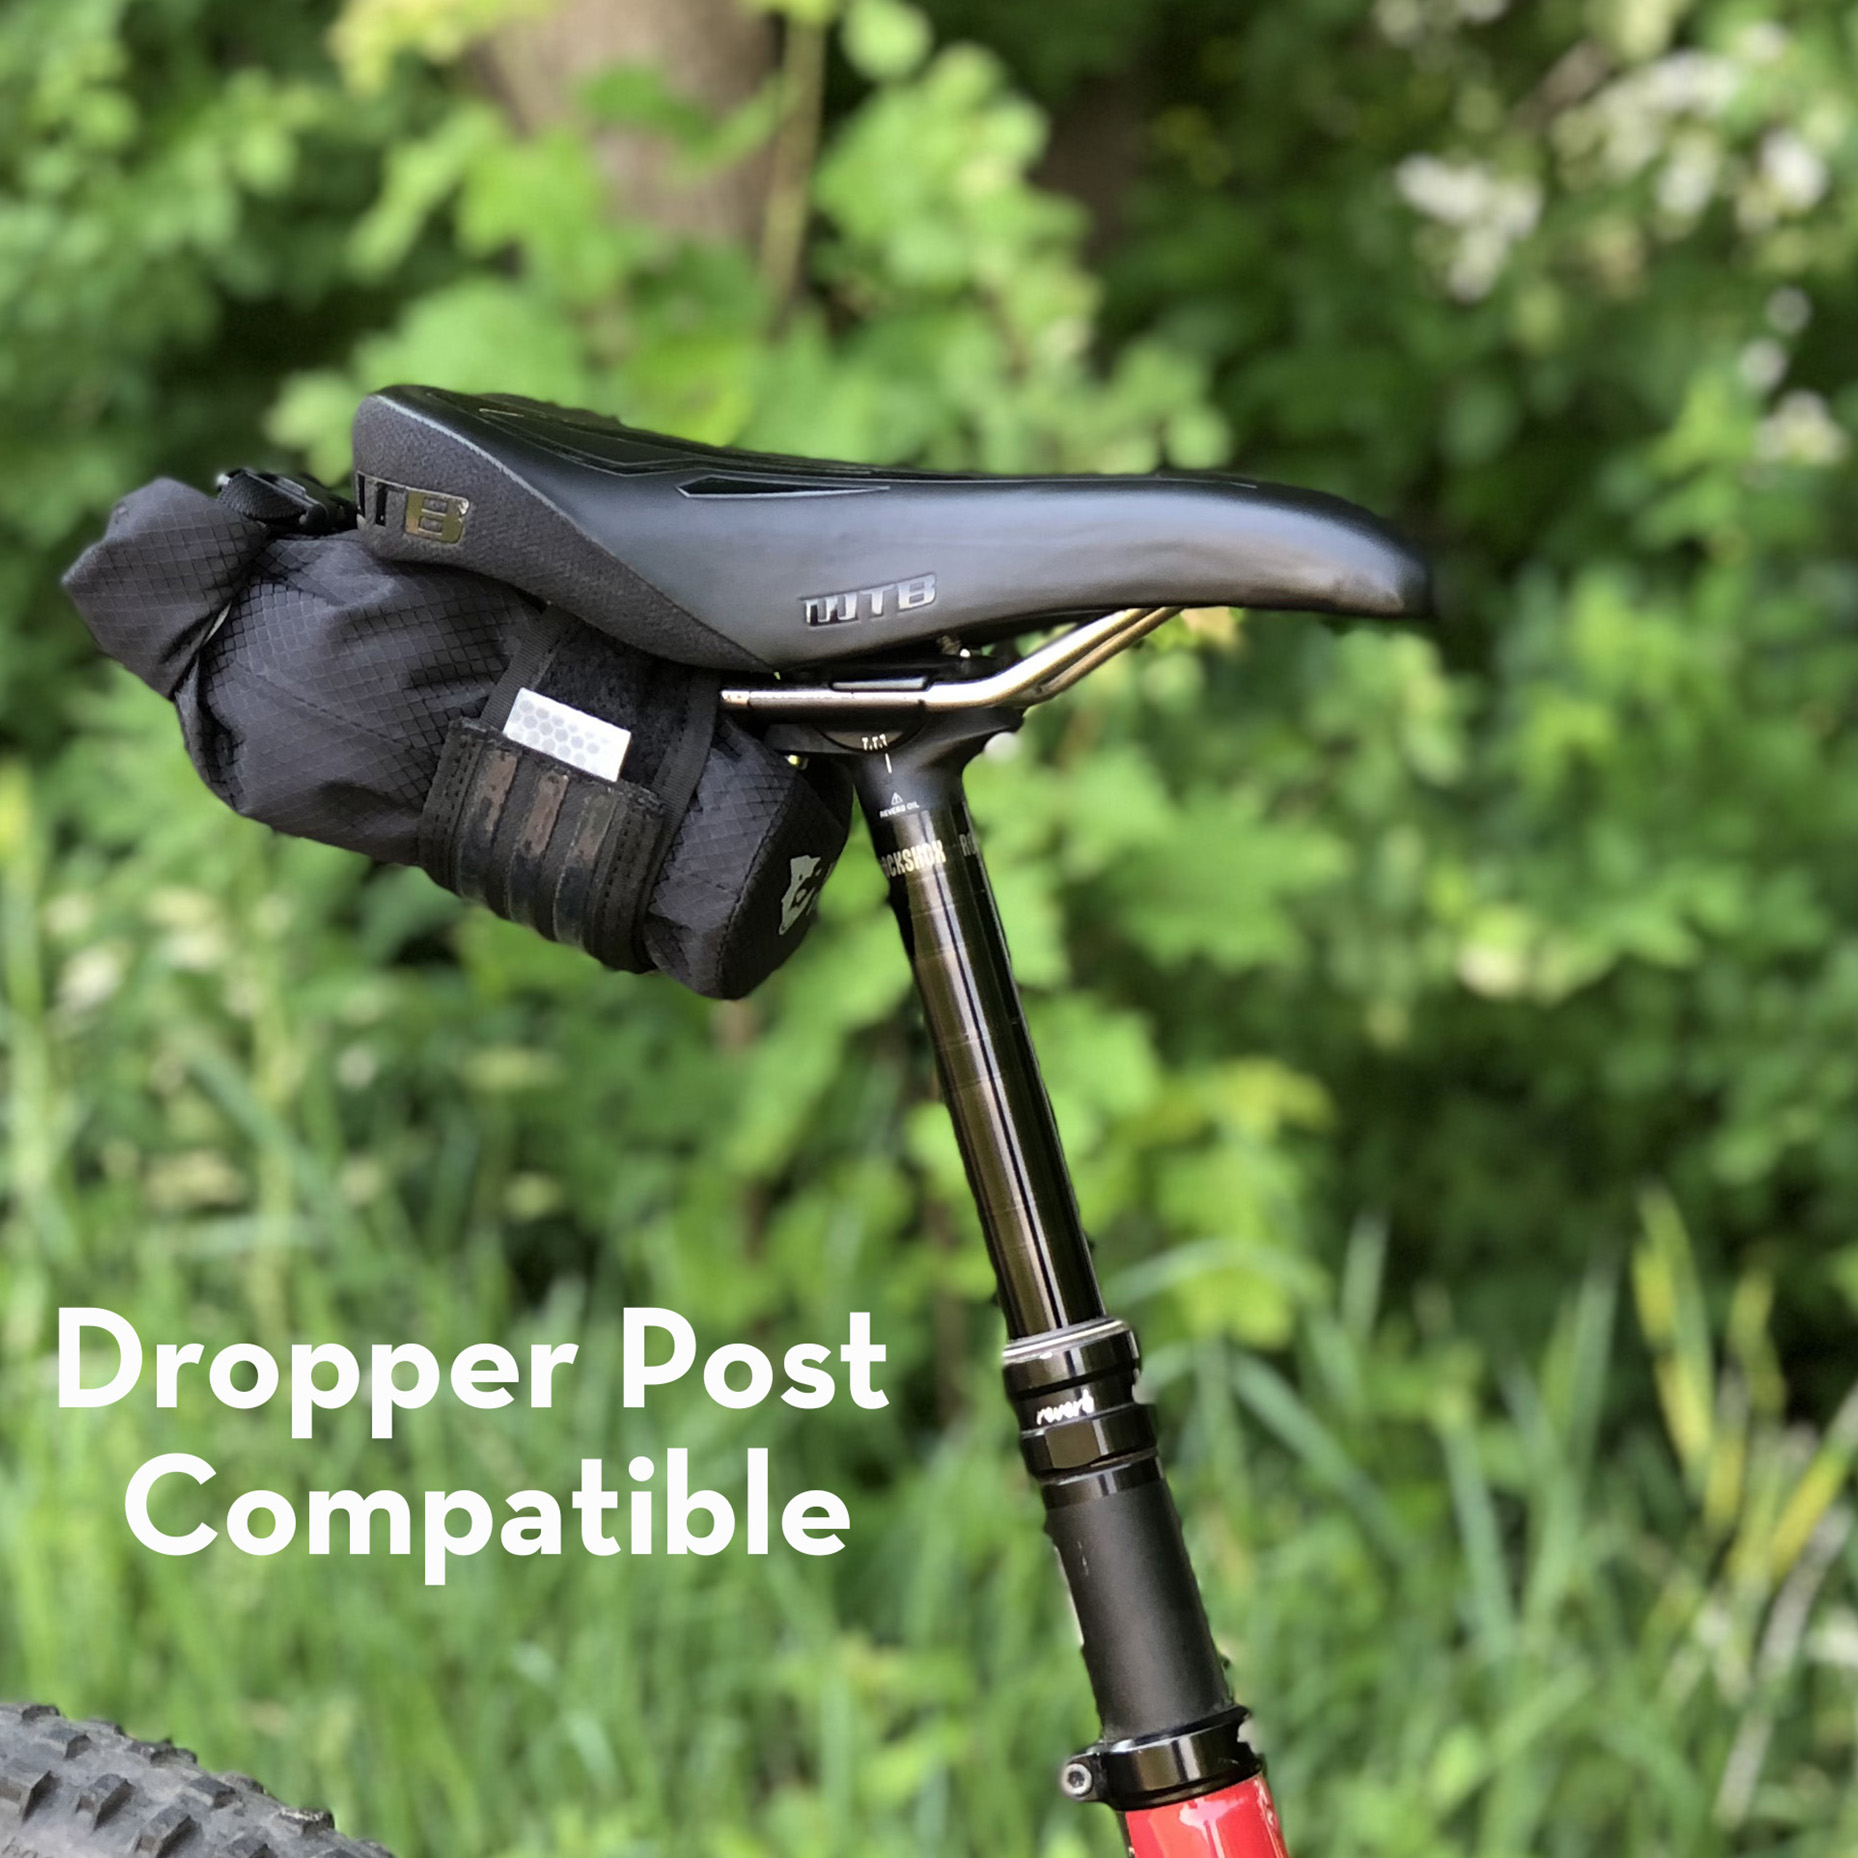 Wolf Tooth Components adds extra baggage with B-Rad Pump Bag & Roll Top